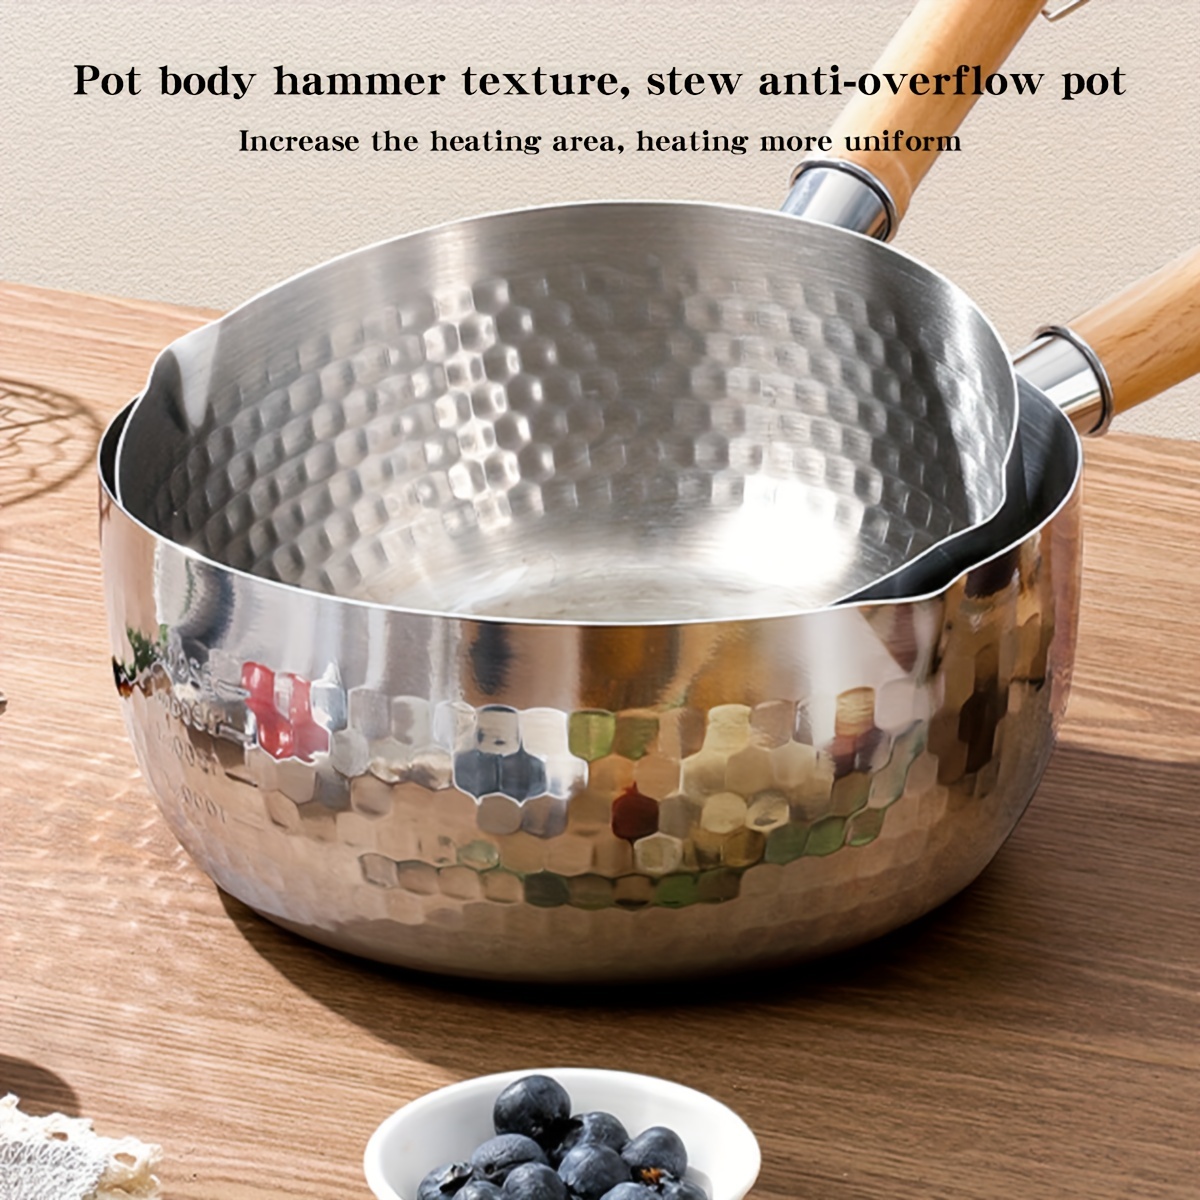 Yukihira Stainless Steel Flat Pan - Japanese-style Non-stick Soup Pot With  Cover, 304 Milk Pot, Food Supplement Pan, Instant Noodle Pot, Wooden Detachable  Handle Cook Pot - - Temu